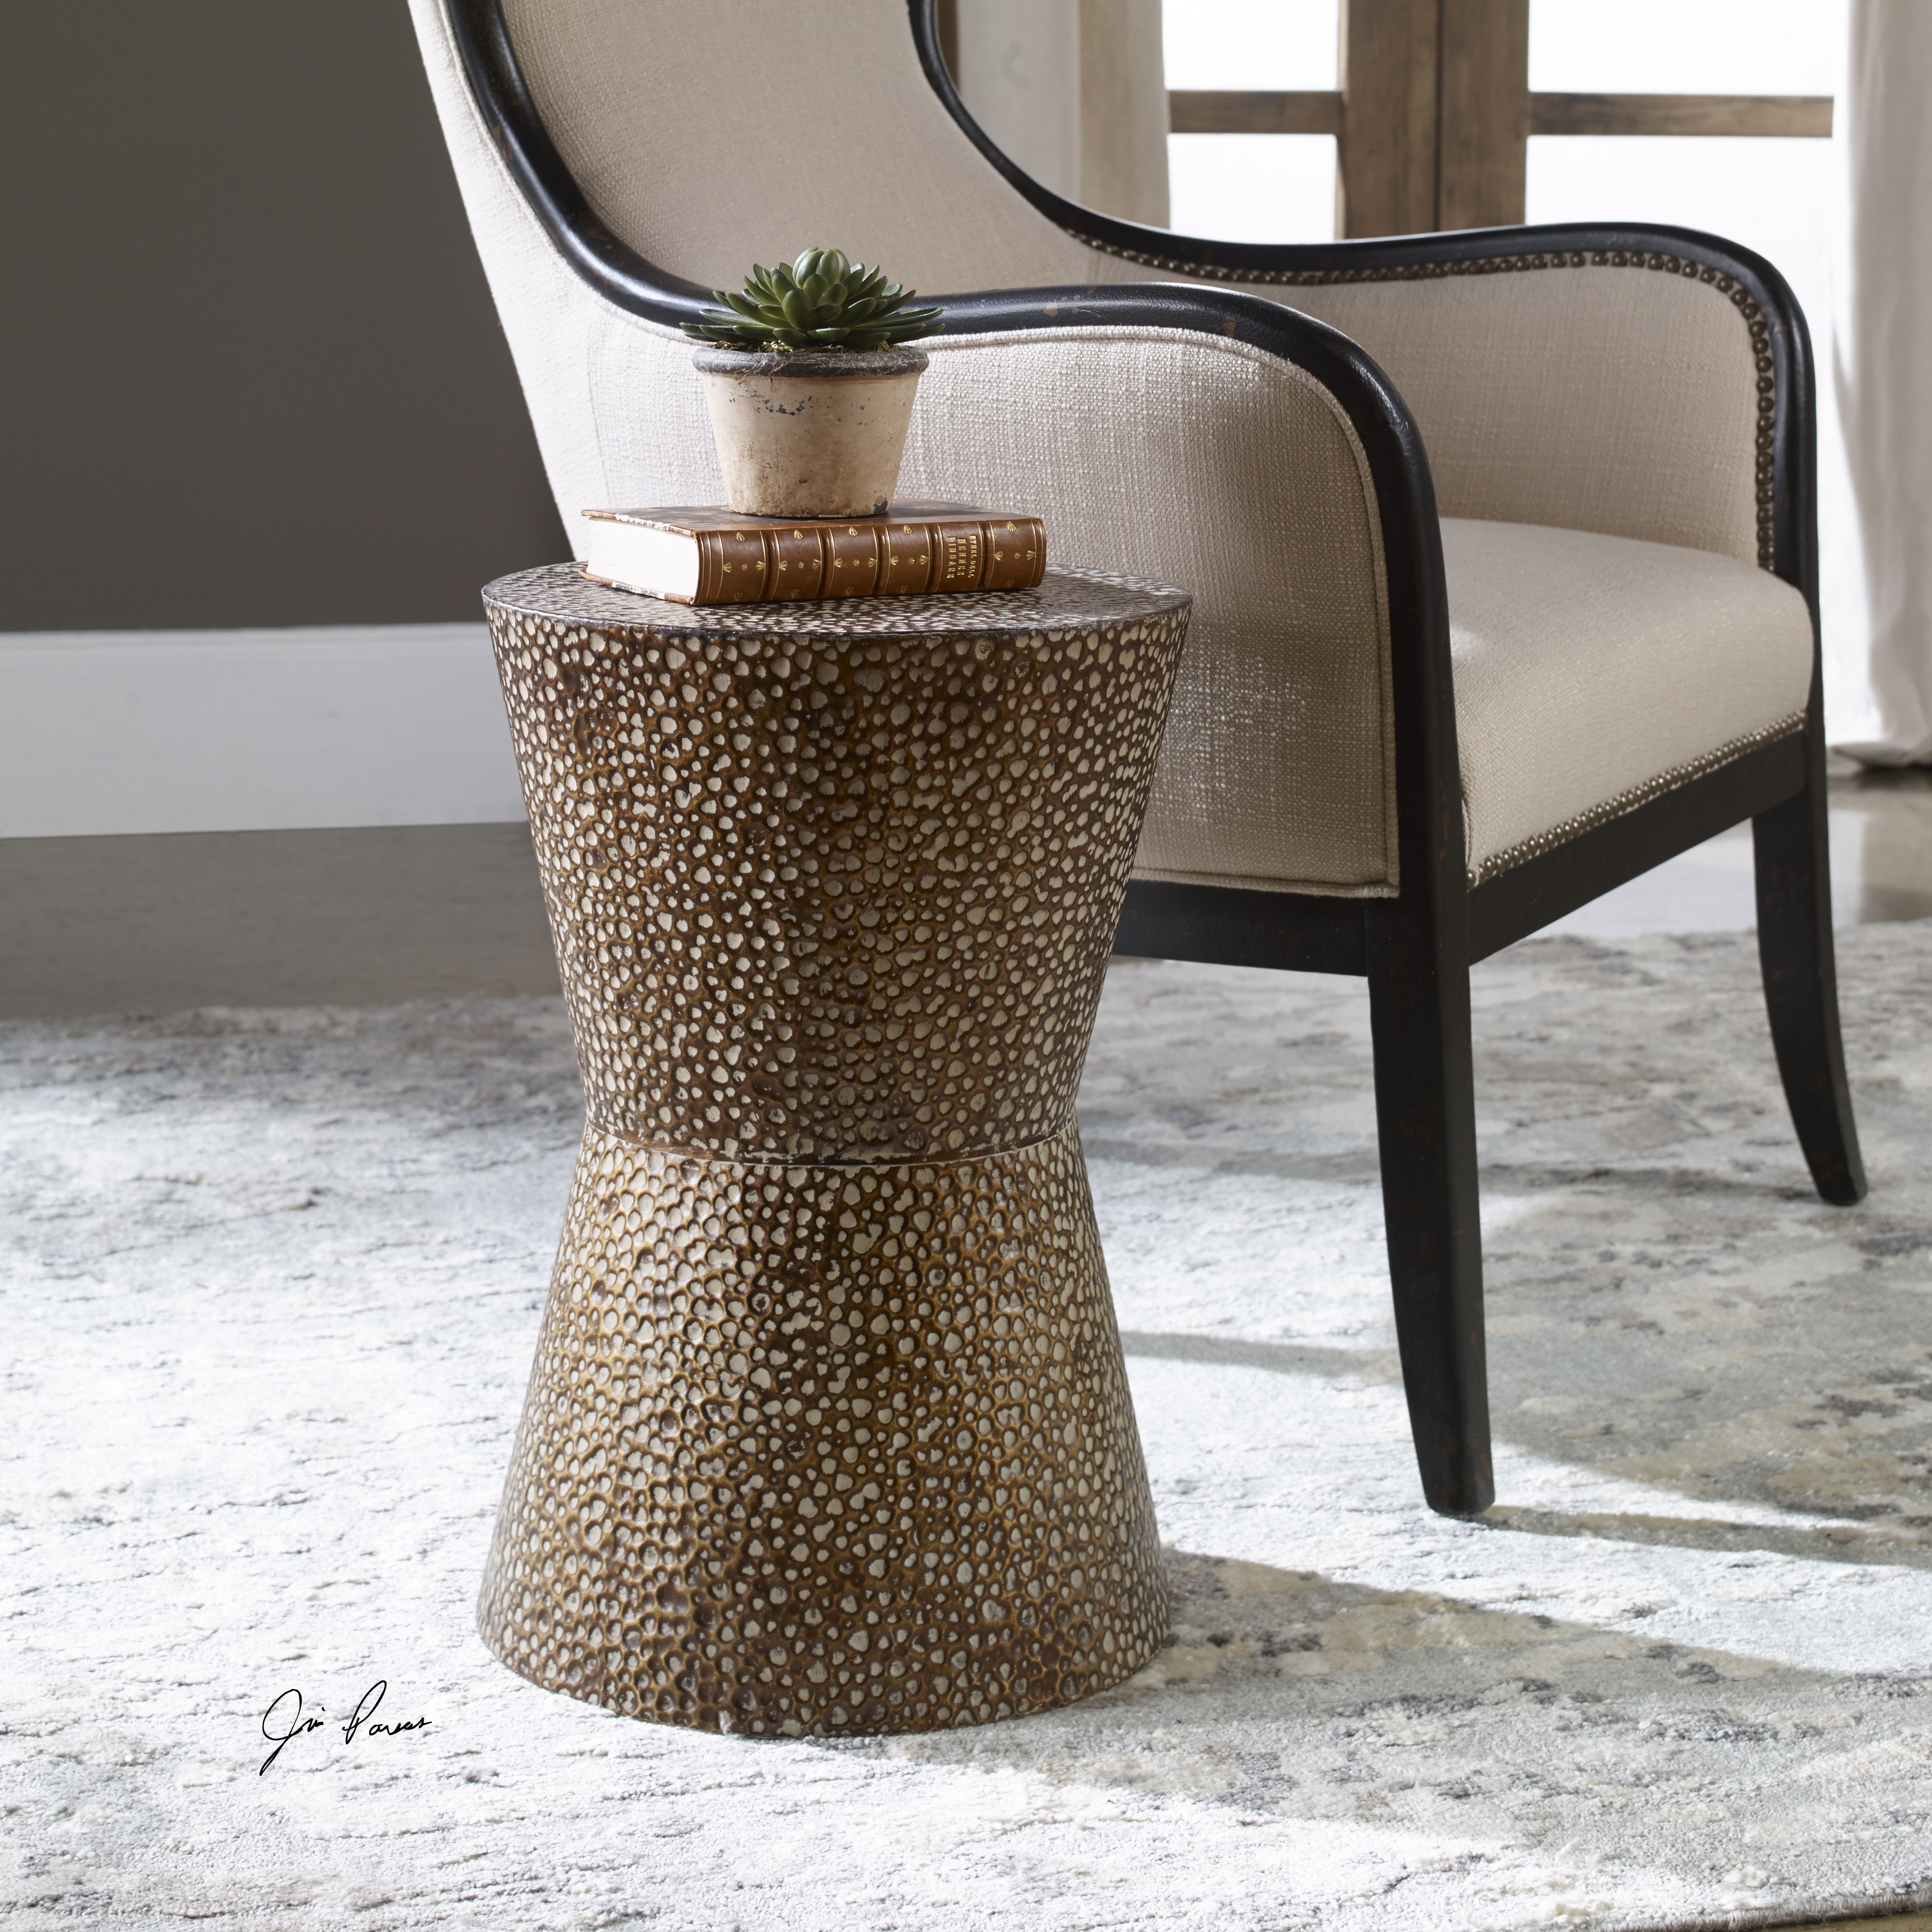 Cutler Drum Shaped Accent Table - Image 1